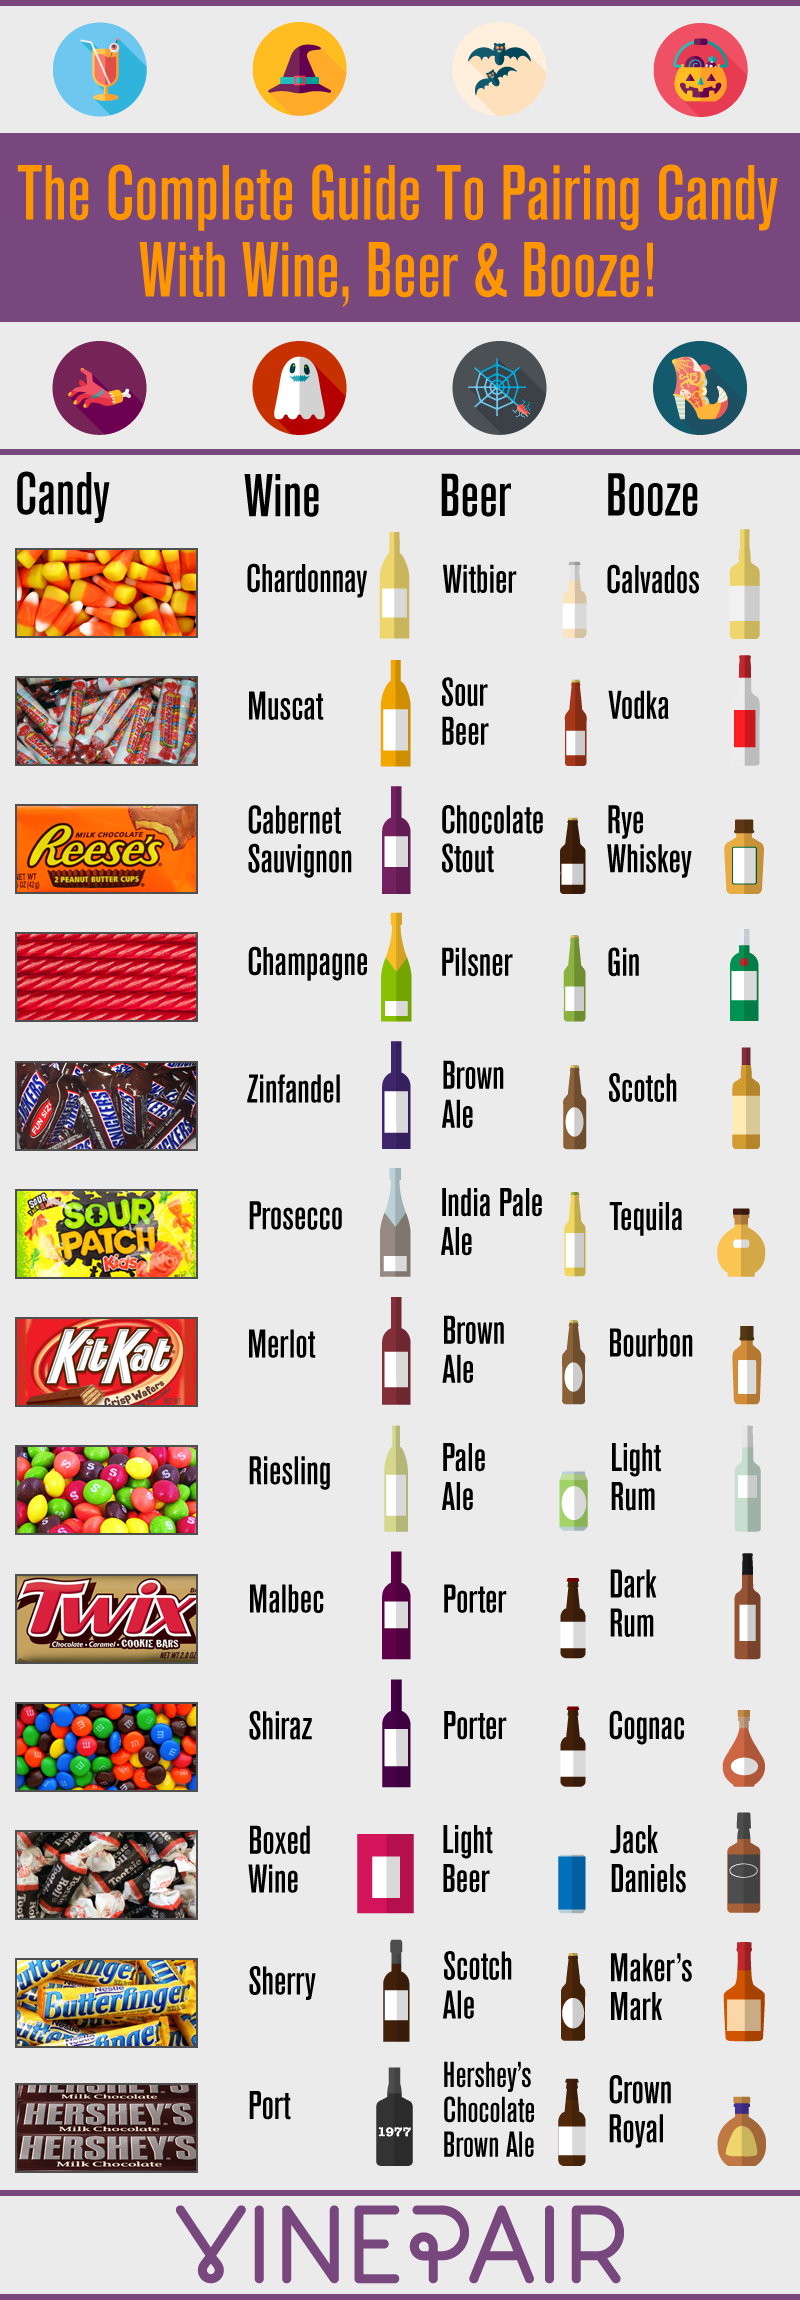 The Complete Guide To Pairing Candy With Wine, Beer And Booze